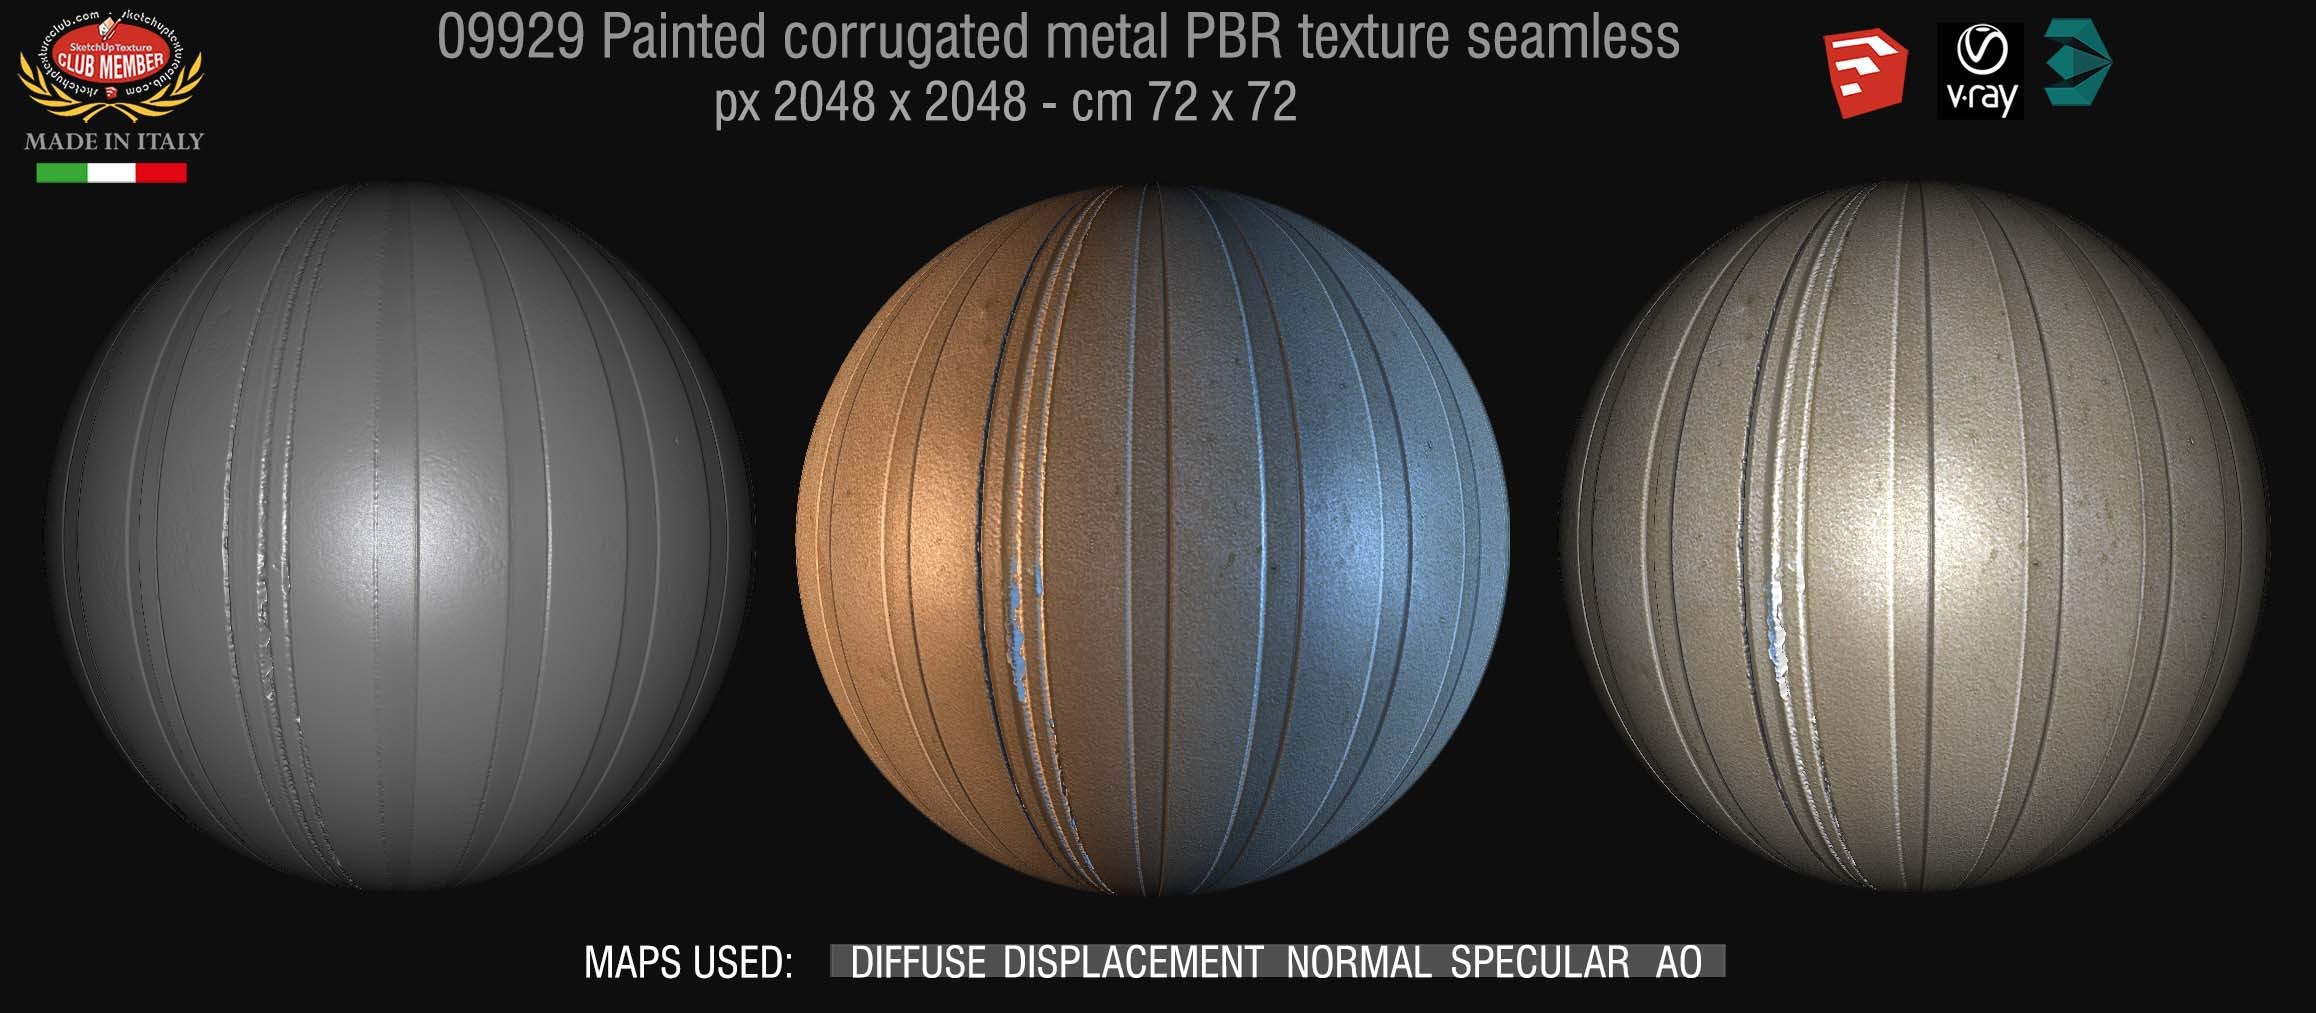 09929 Painted corrugated metal PBR texture seamless DEMO